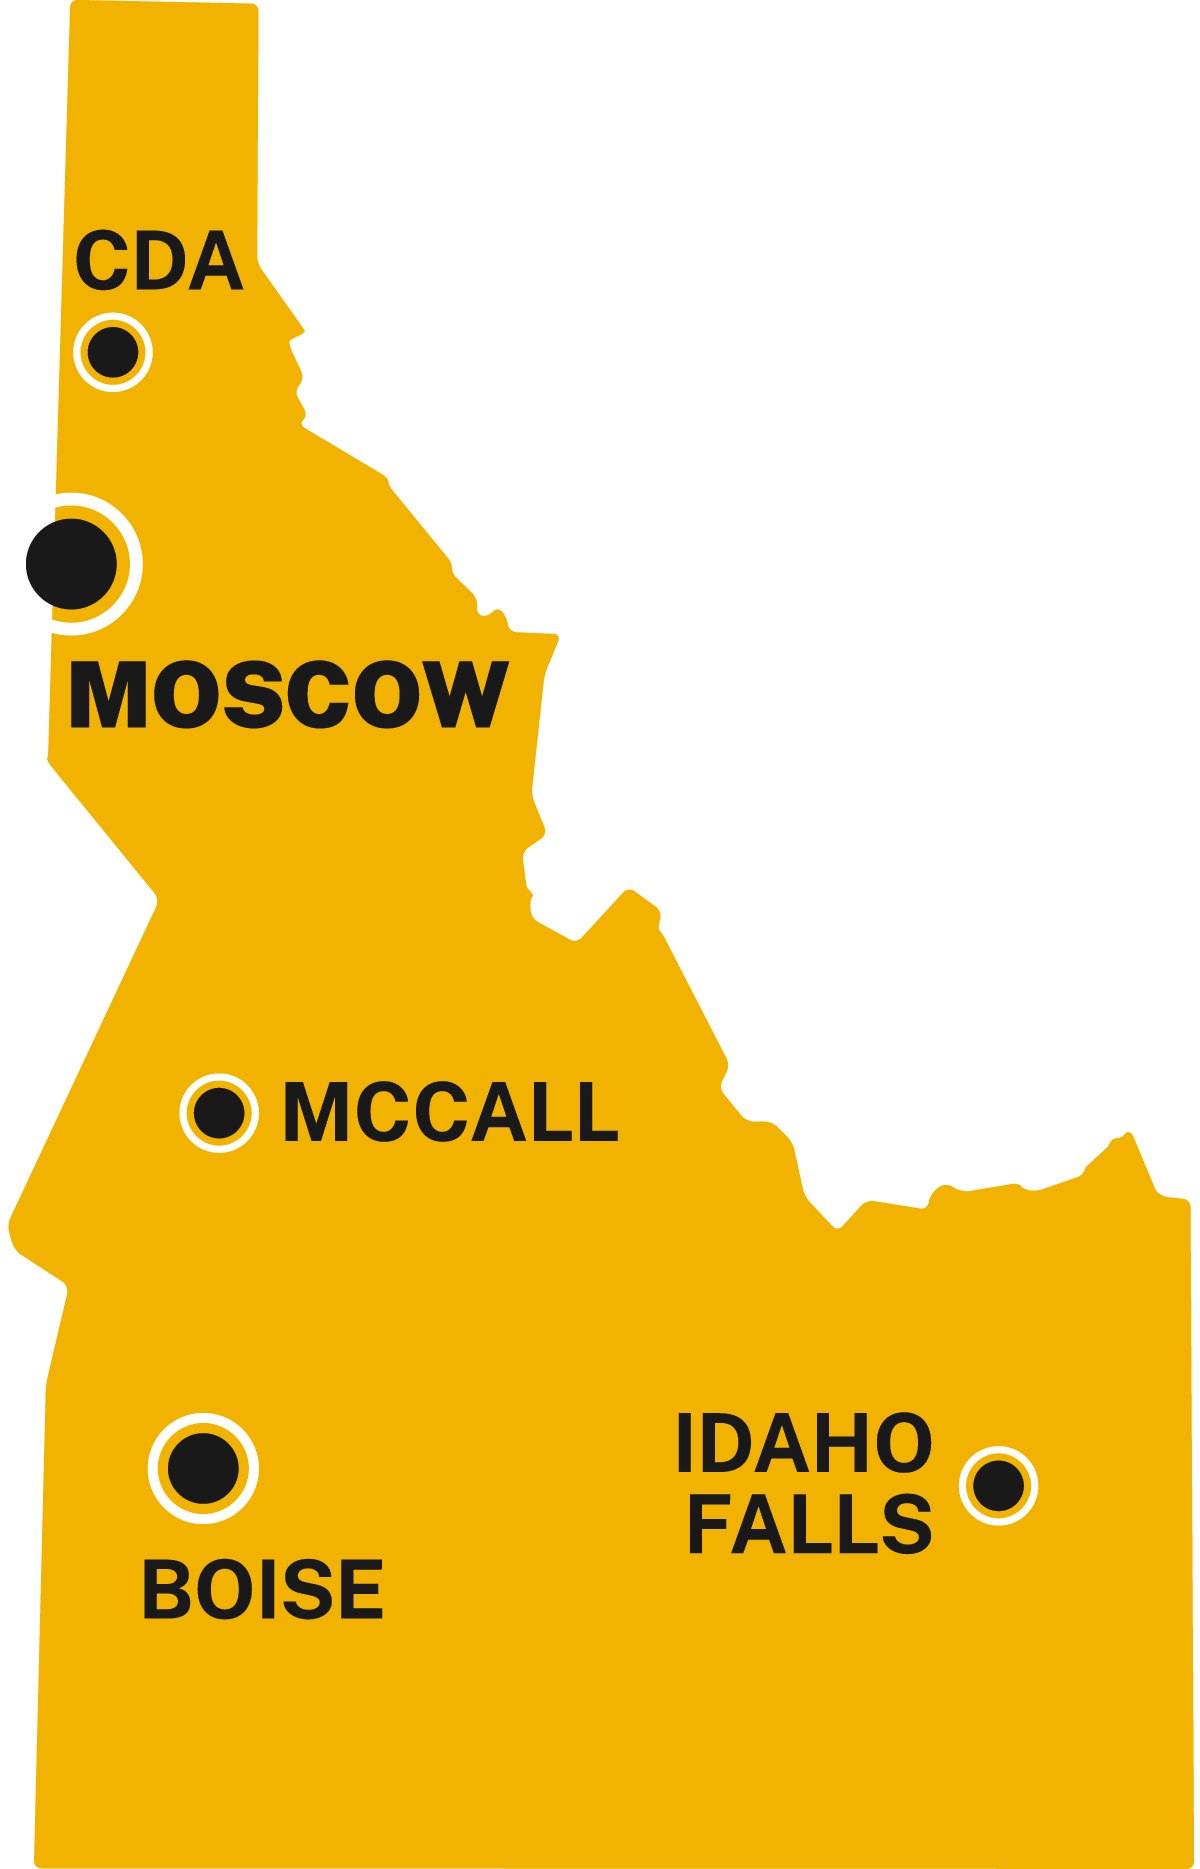 Graphic representation of Idaho and its campuses, research and extension centers in Coeur d’Alene, Moscow, McCall, Boise and Idaho Falls.